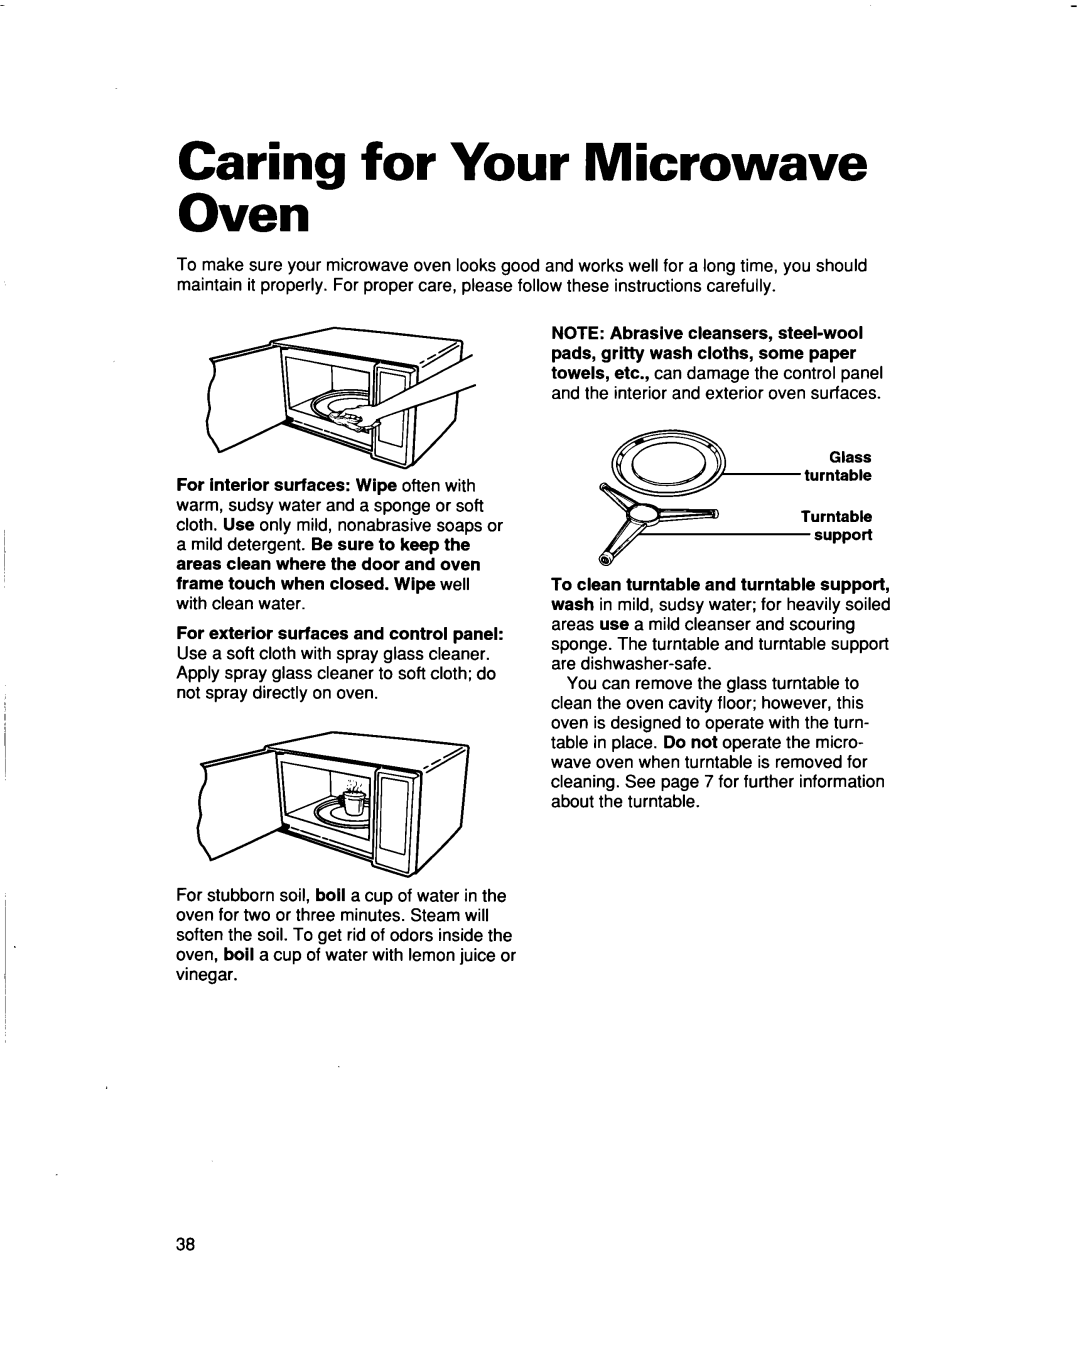 Whirlpool MT5120XAQ Caring for Your Microwave Oven, For exterior surfaces and control panel, support 